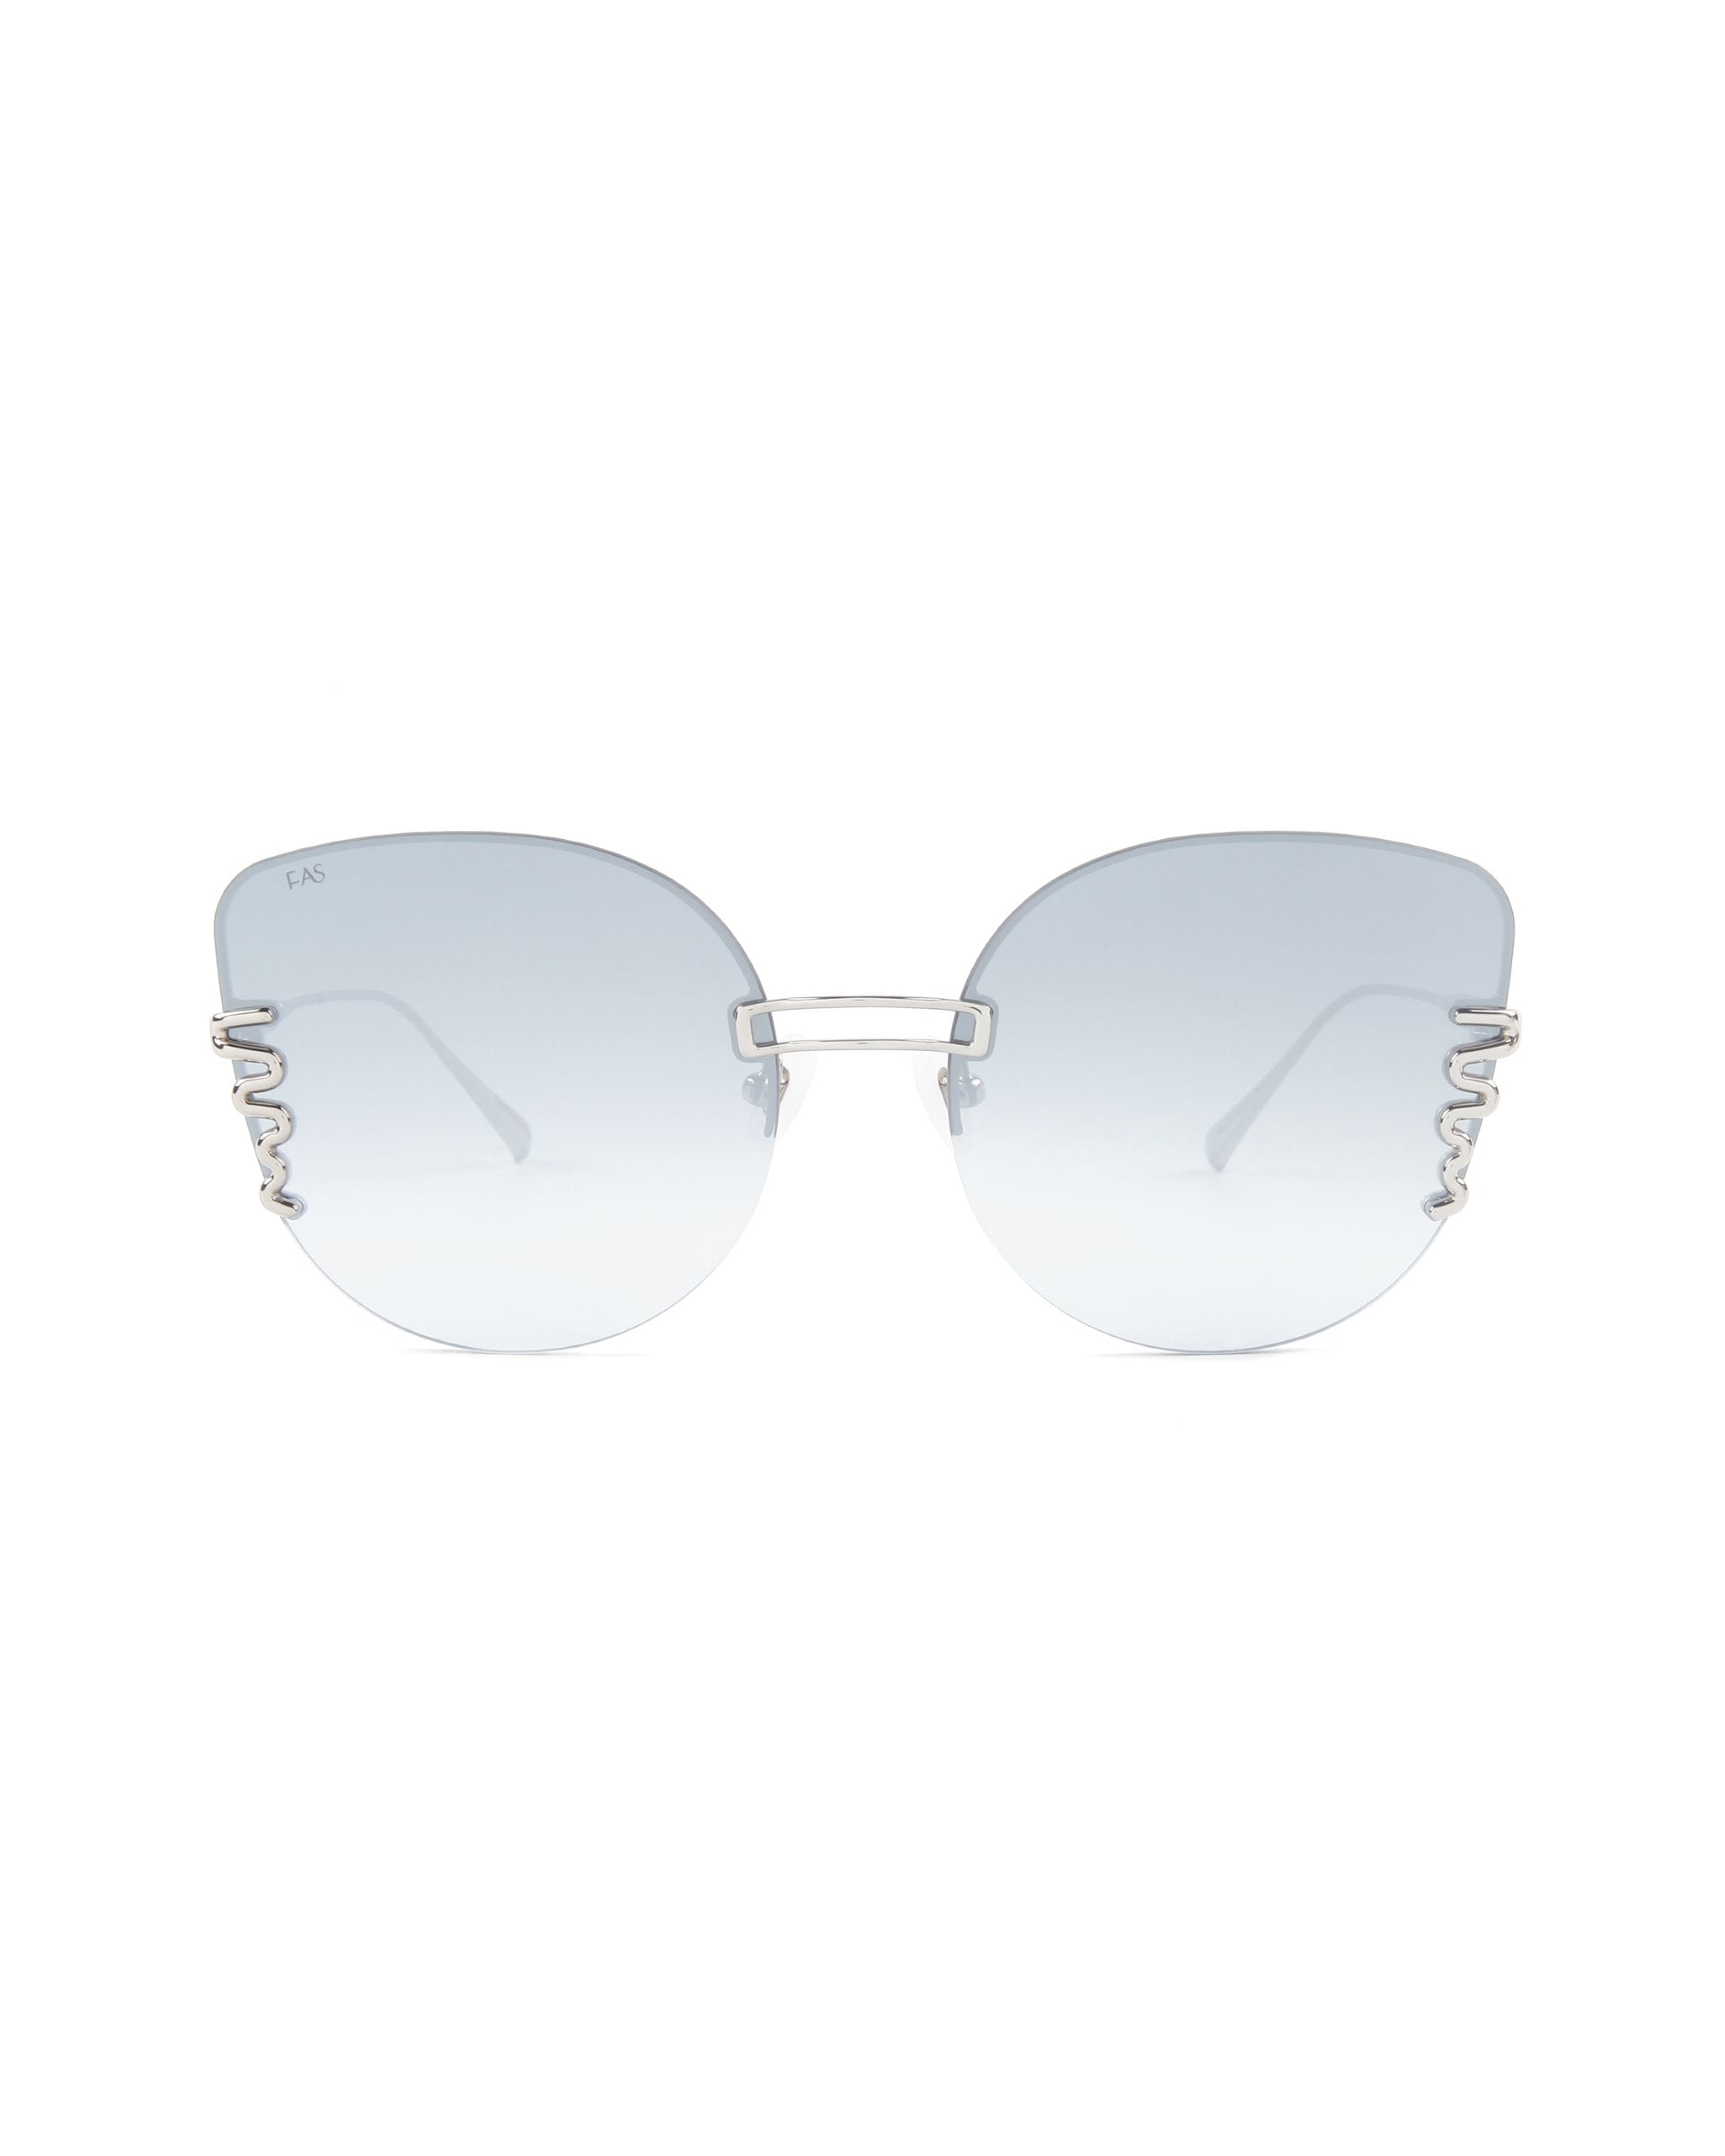 A pair of stylish oversized cat-eye sunglasses with large, lightly tinted blue lenses and a silver metal frame. The temples feature a delicate and intricate cut-out design. The overall look is modern and elegant, complemented by adjustable nosepads for a comfortable fit. Introducing Girlboss by For Art&#39;s Sake®.